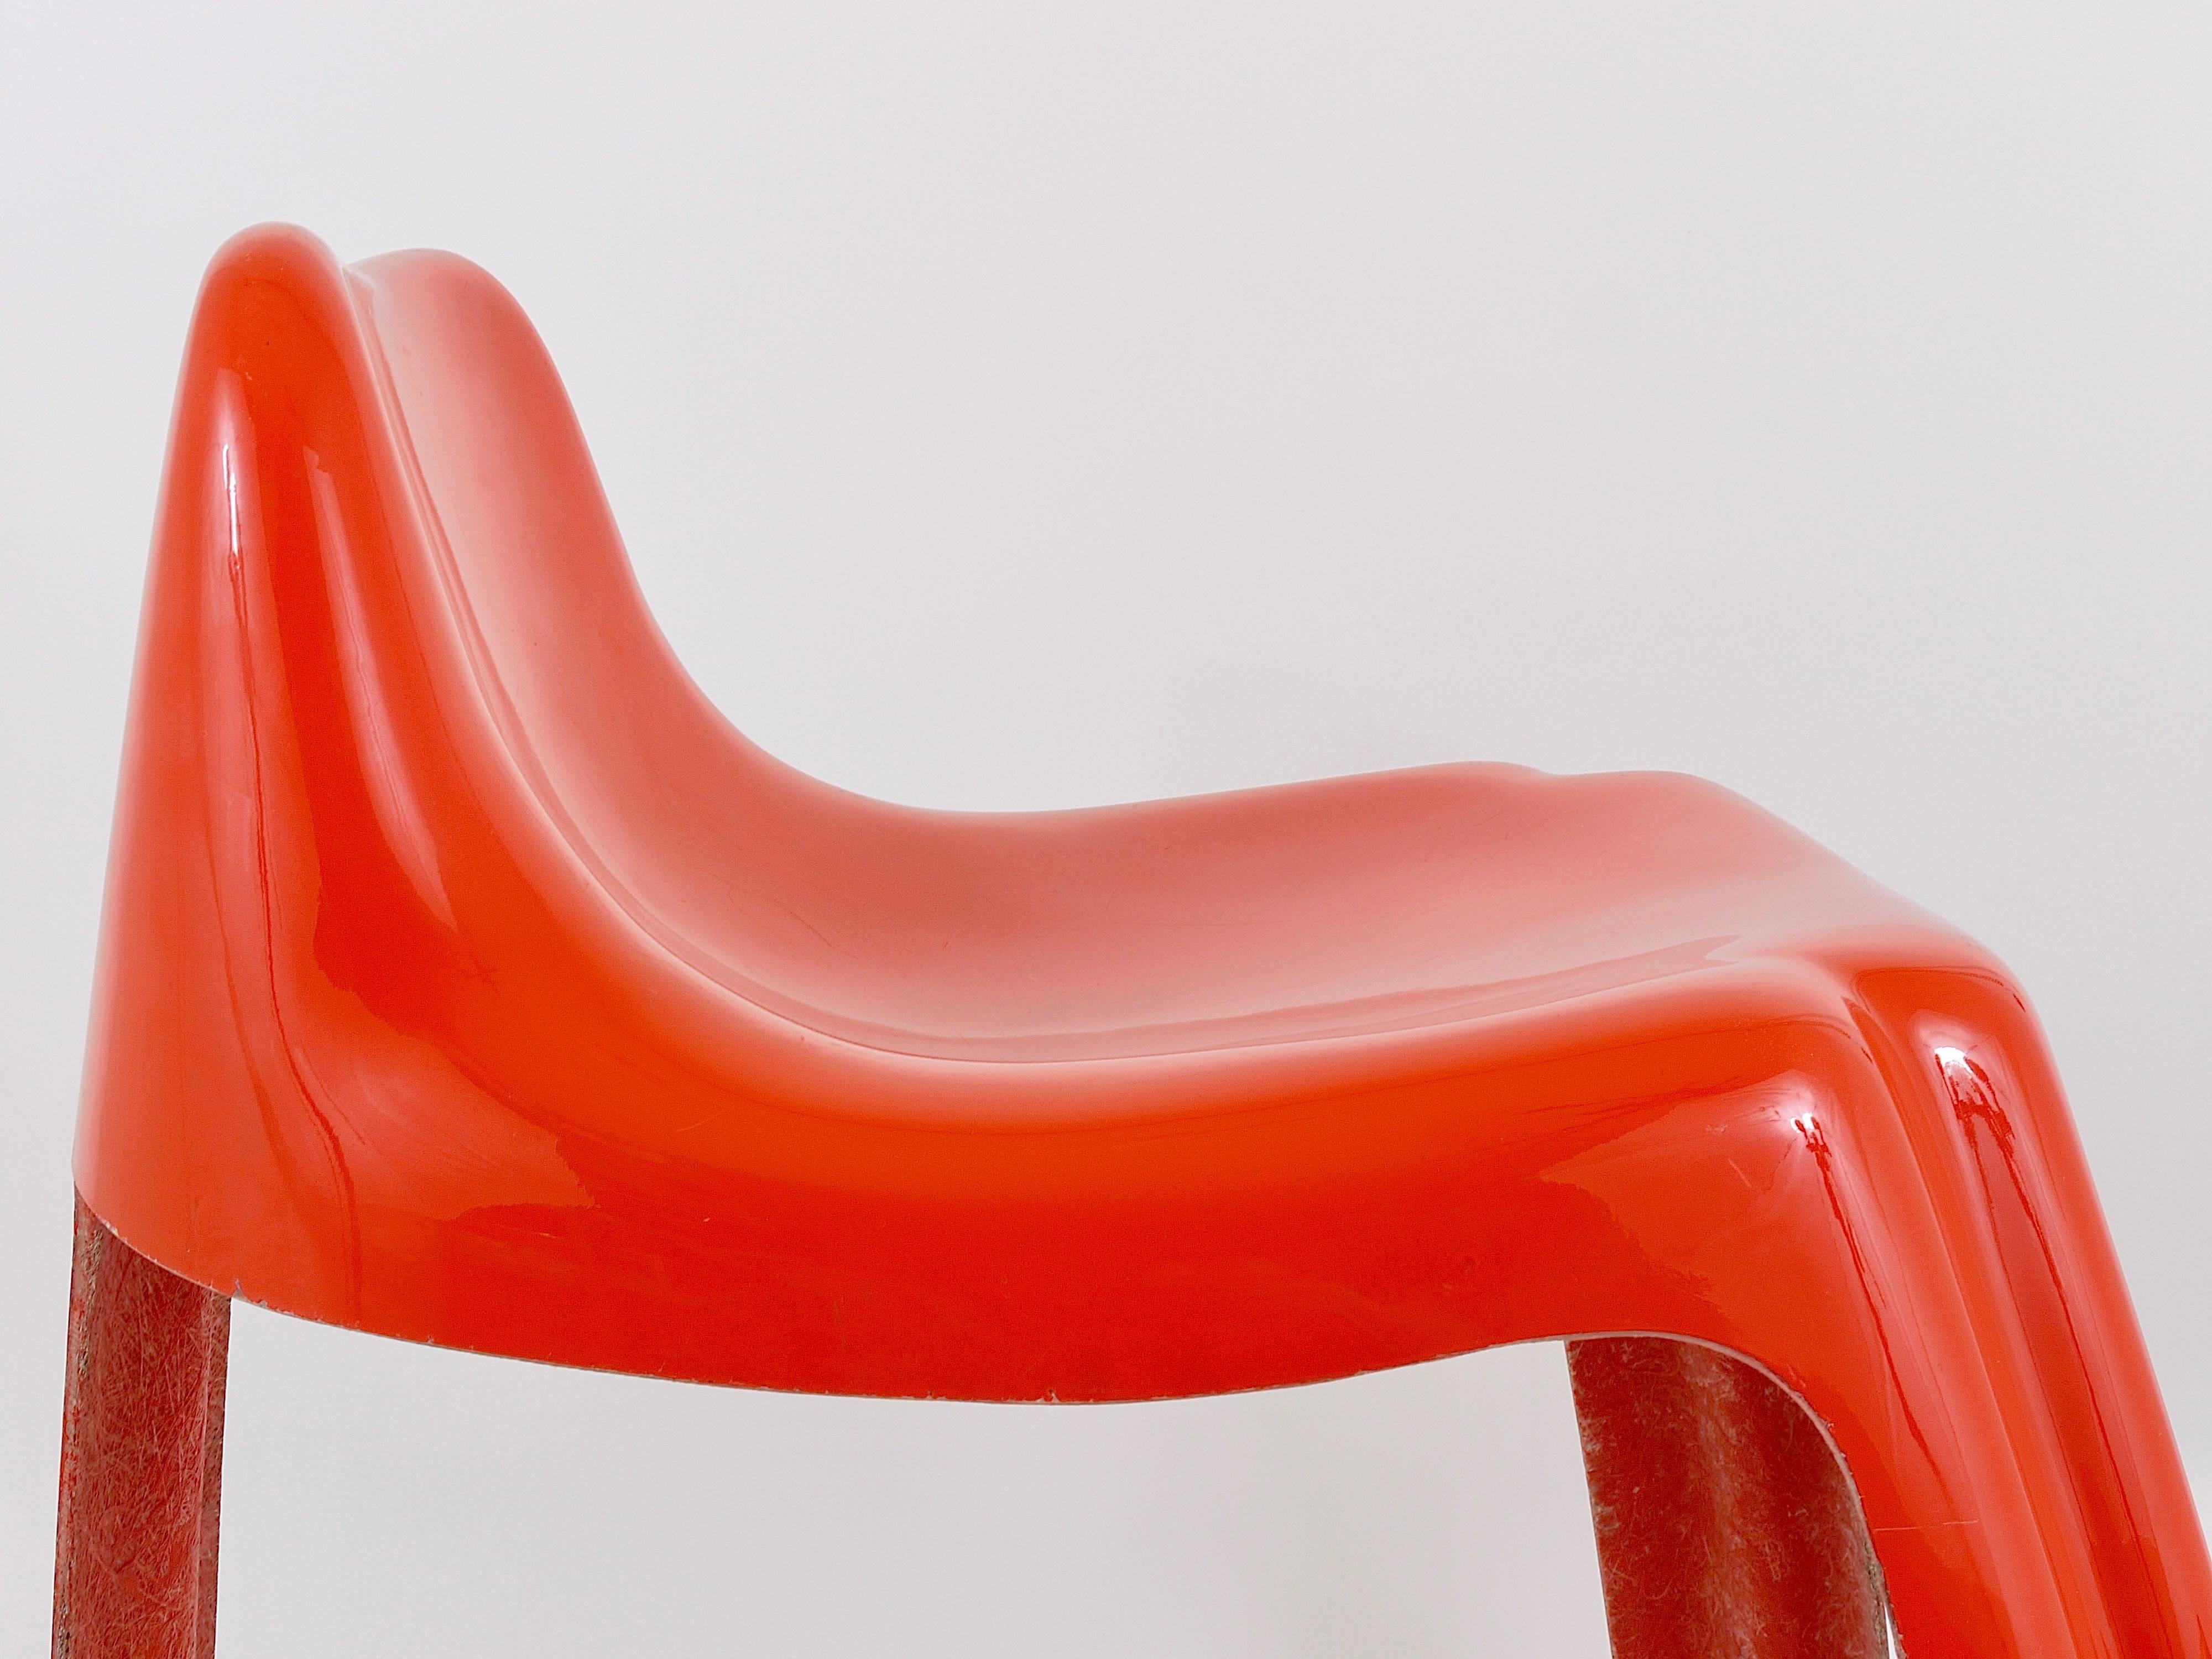 An orange midcentury stool or chair from the 1970s, crafted from lacquered fiberglass. This beuatiful piece, known as the 